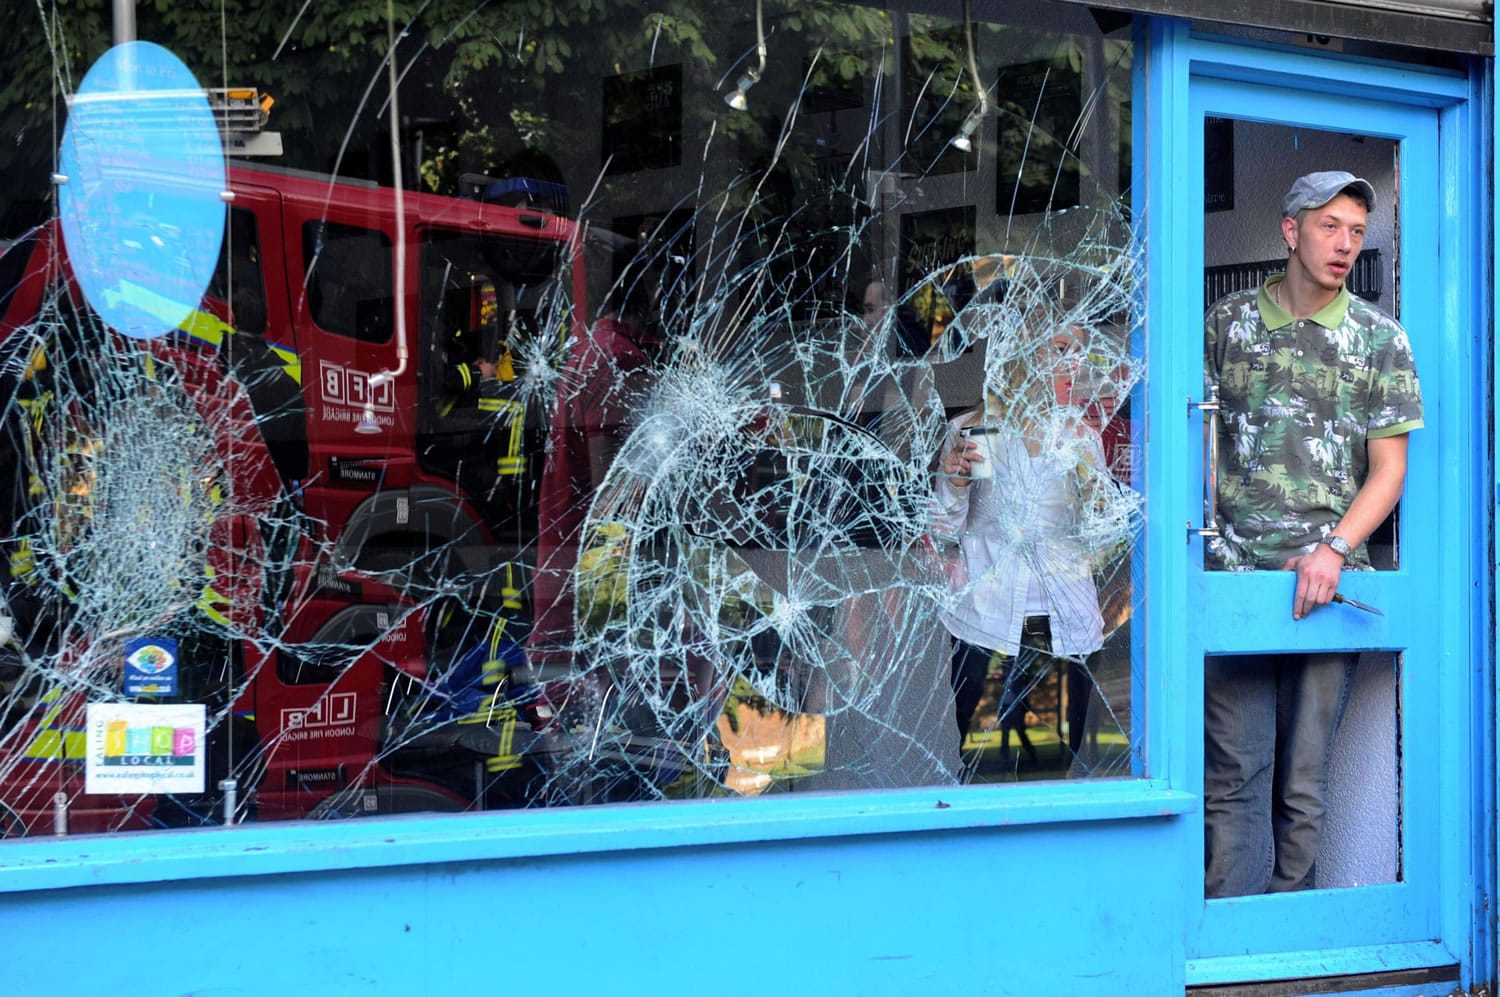 Shop keepers begin to clean up Tuesday on Ealing High Street in west London following a third straight day of riots.